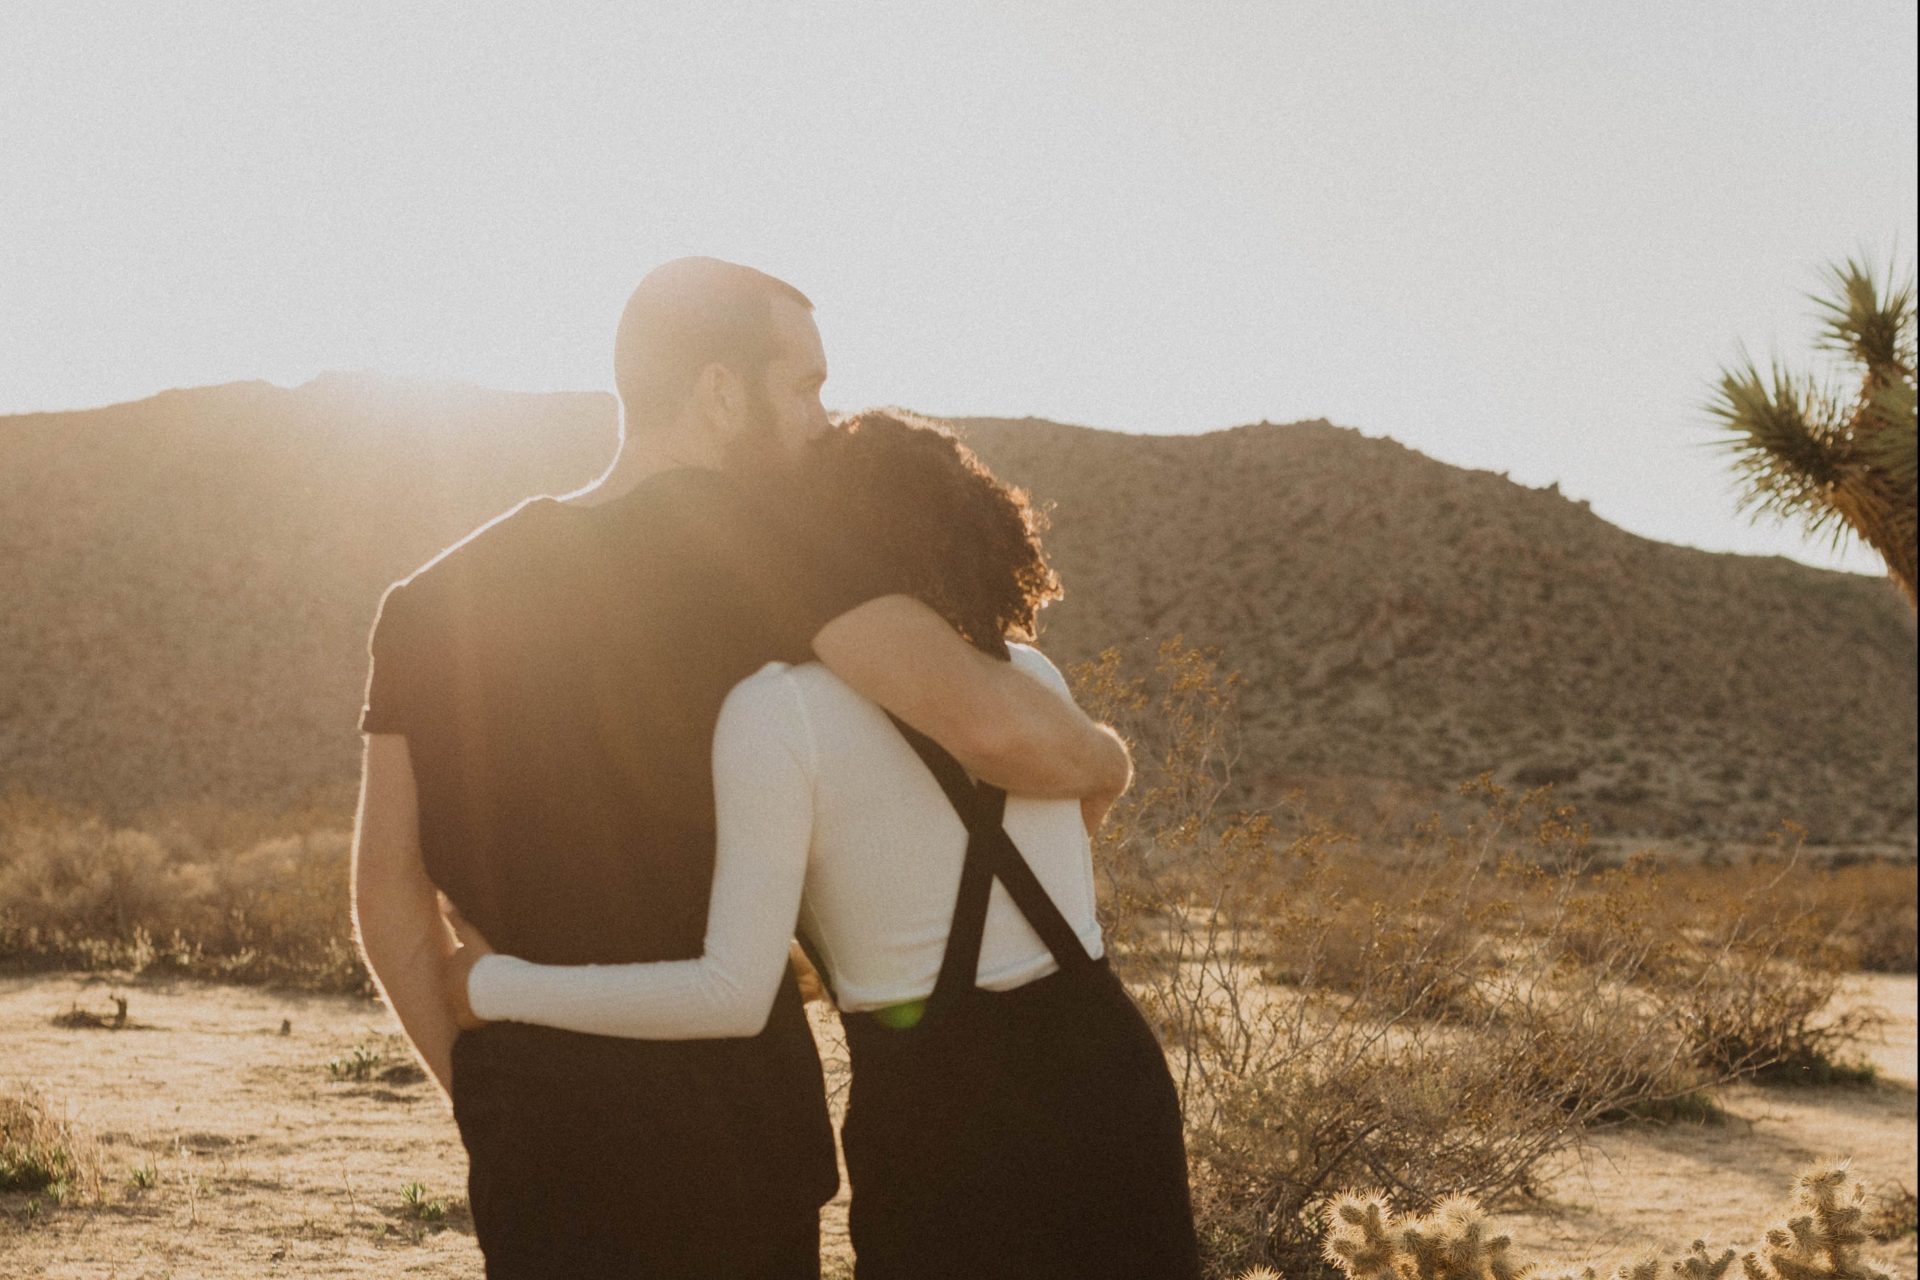 How To Calm Down Your Girlfriend When She's Spiraling, Based On Her Zodiac Sign